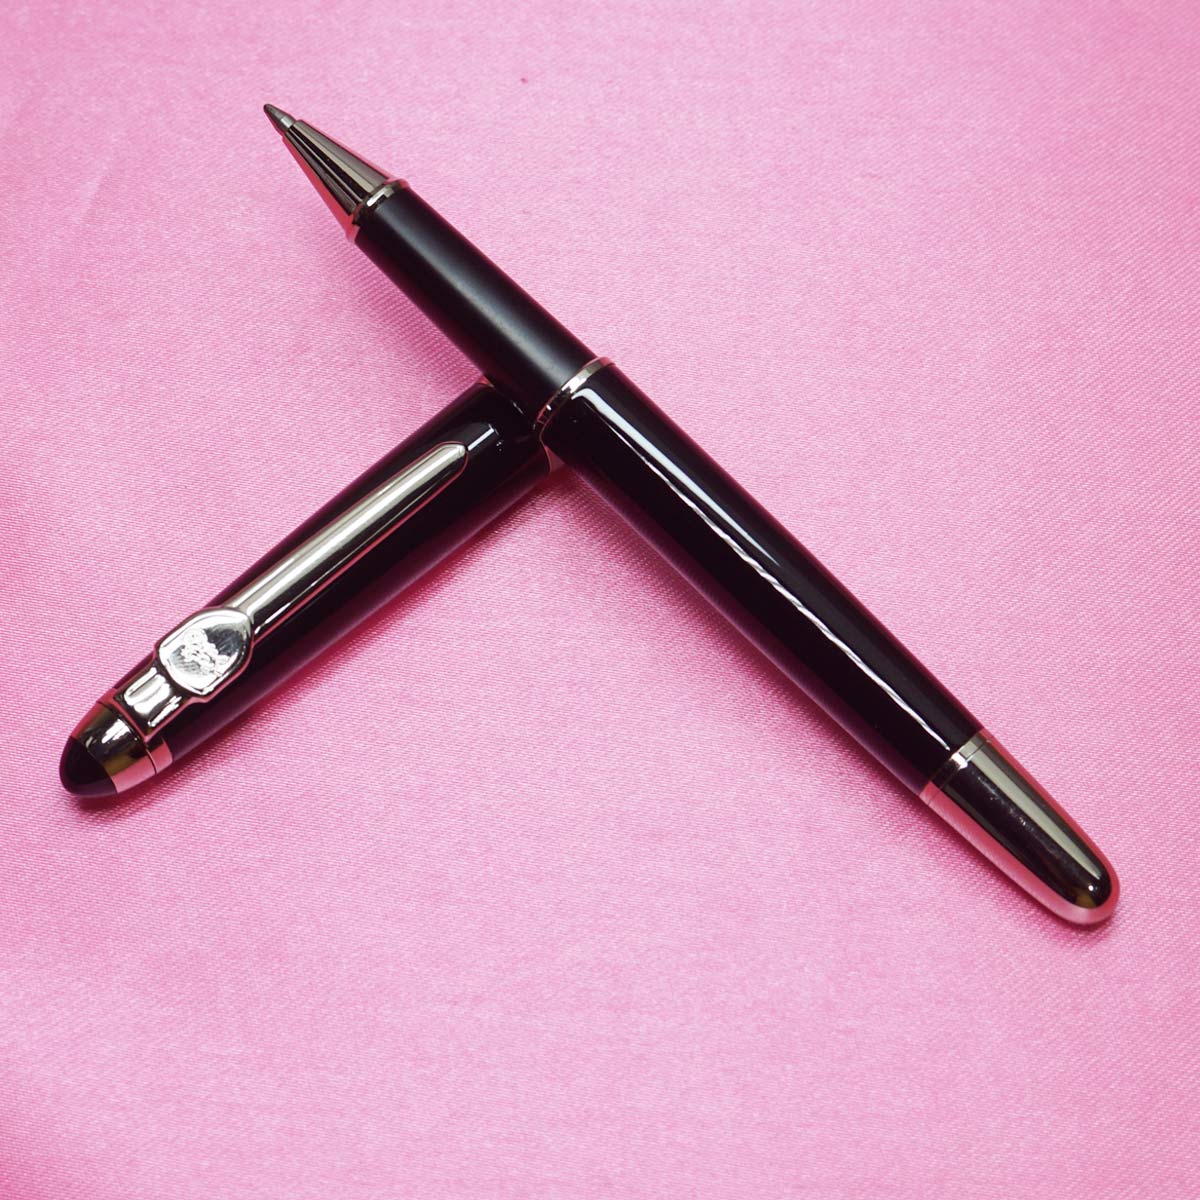 Jinhao 163 Black Color Body and Design Cap with Silver Trims Roller Ball Pen SKU 22295